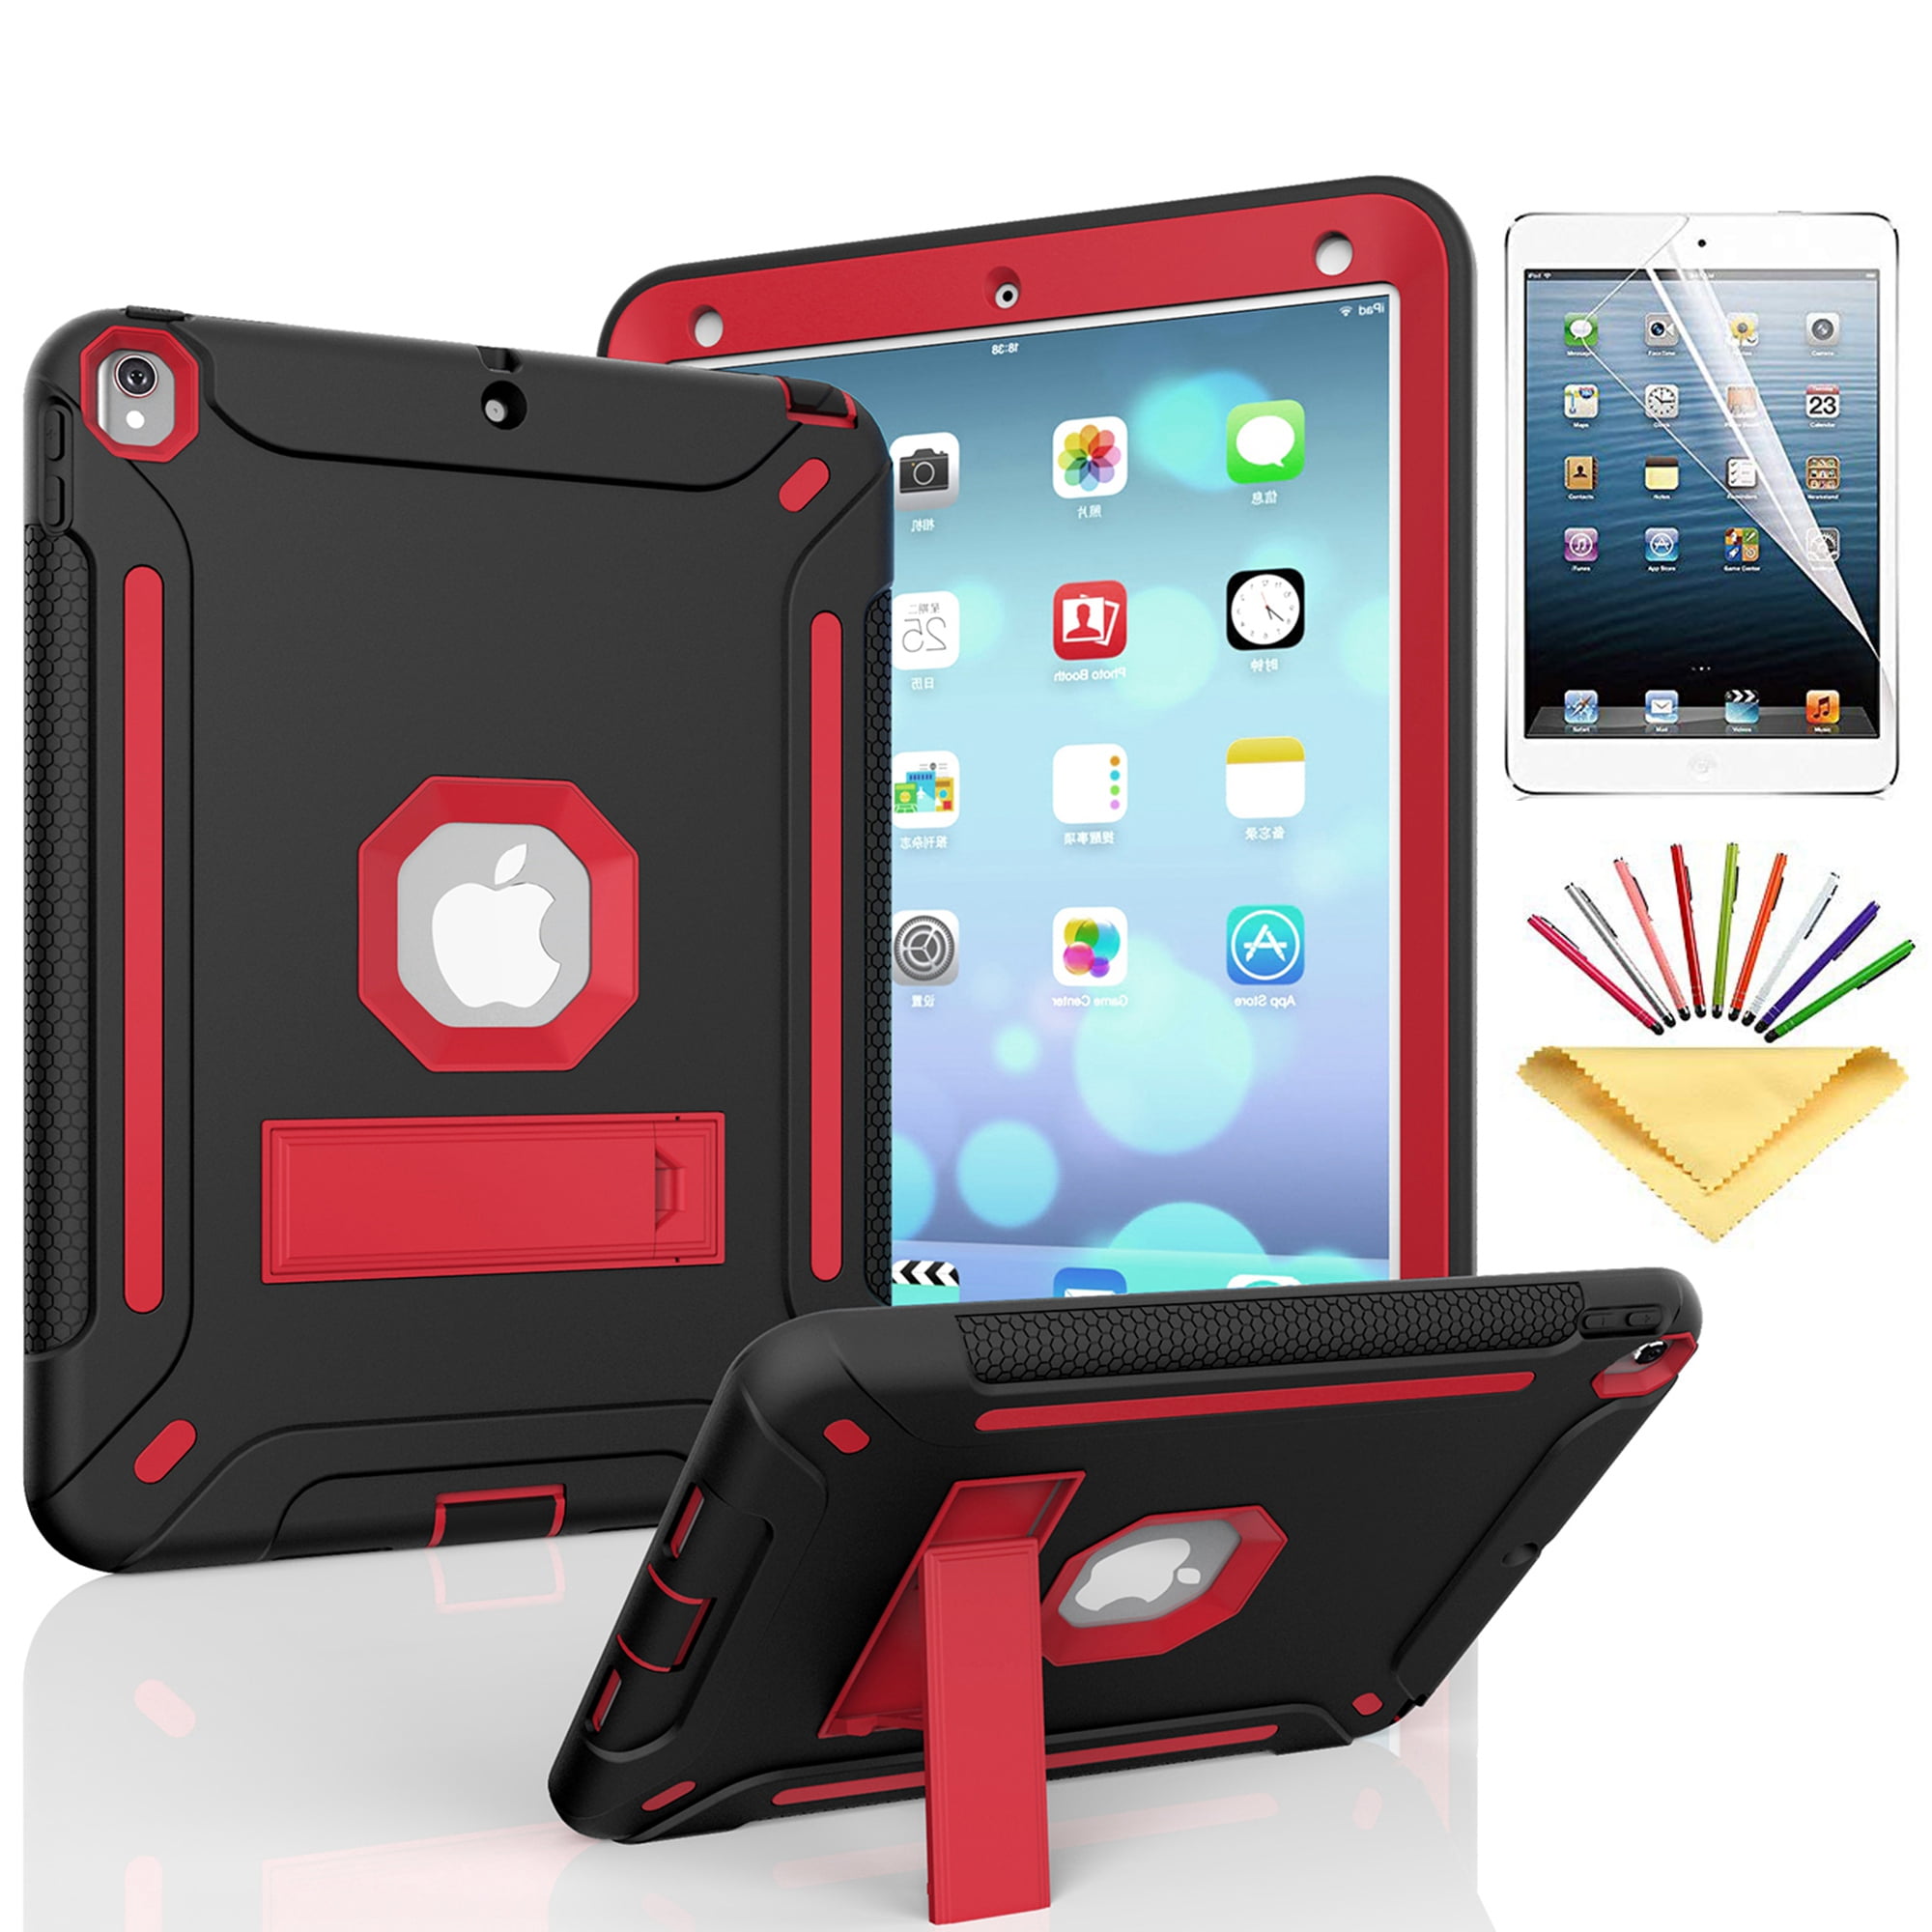 iPad Pro 10.5 Case , iPad Air 3rd Generation Case, Dteck Heavy Duty  Shockproof Three Layer Plastic and Silicone Protective Cover with  Kickstand, Free Soft Screen Protector Film, Black/Red 